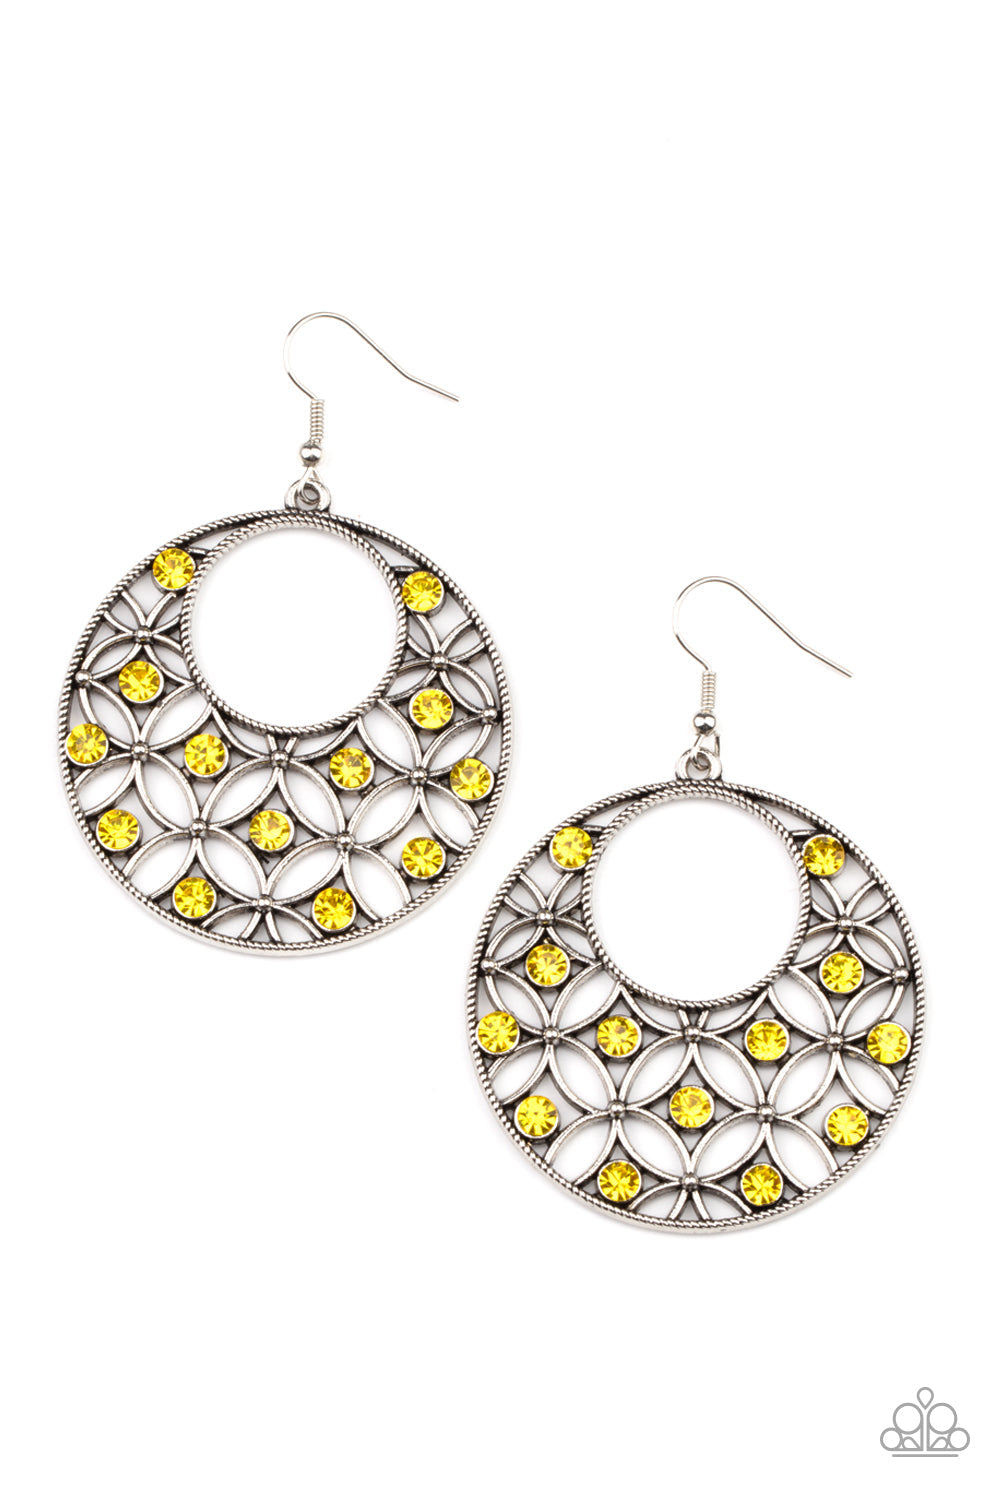 Garden Garnish - Yellow and Silver Earrings - Paparazzi Accessories - Dotted with glittery Illuminating rhinestones, an airy backdrop of antiqued flowers climb a studded silver hoop for a whimsical look. Earring attaches to a standard fishhook fitting. Sold as one pair of earrings.